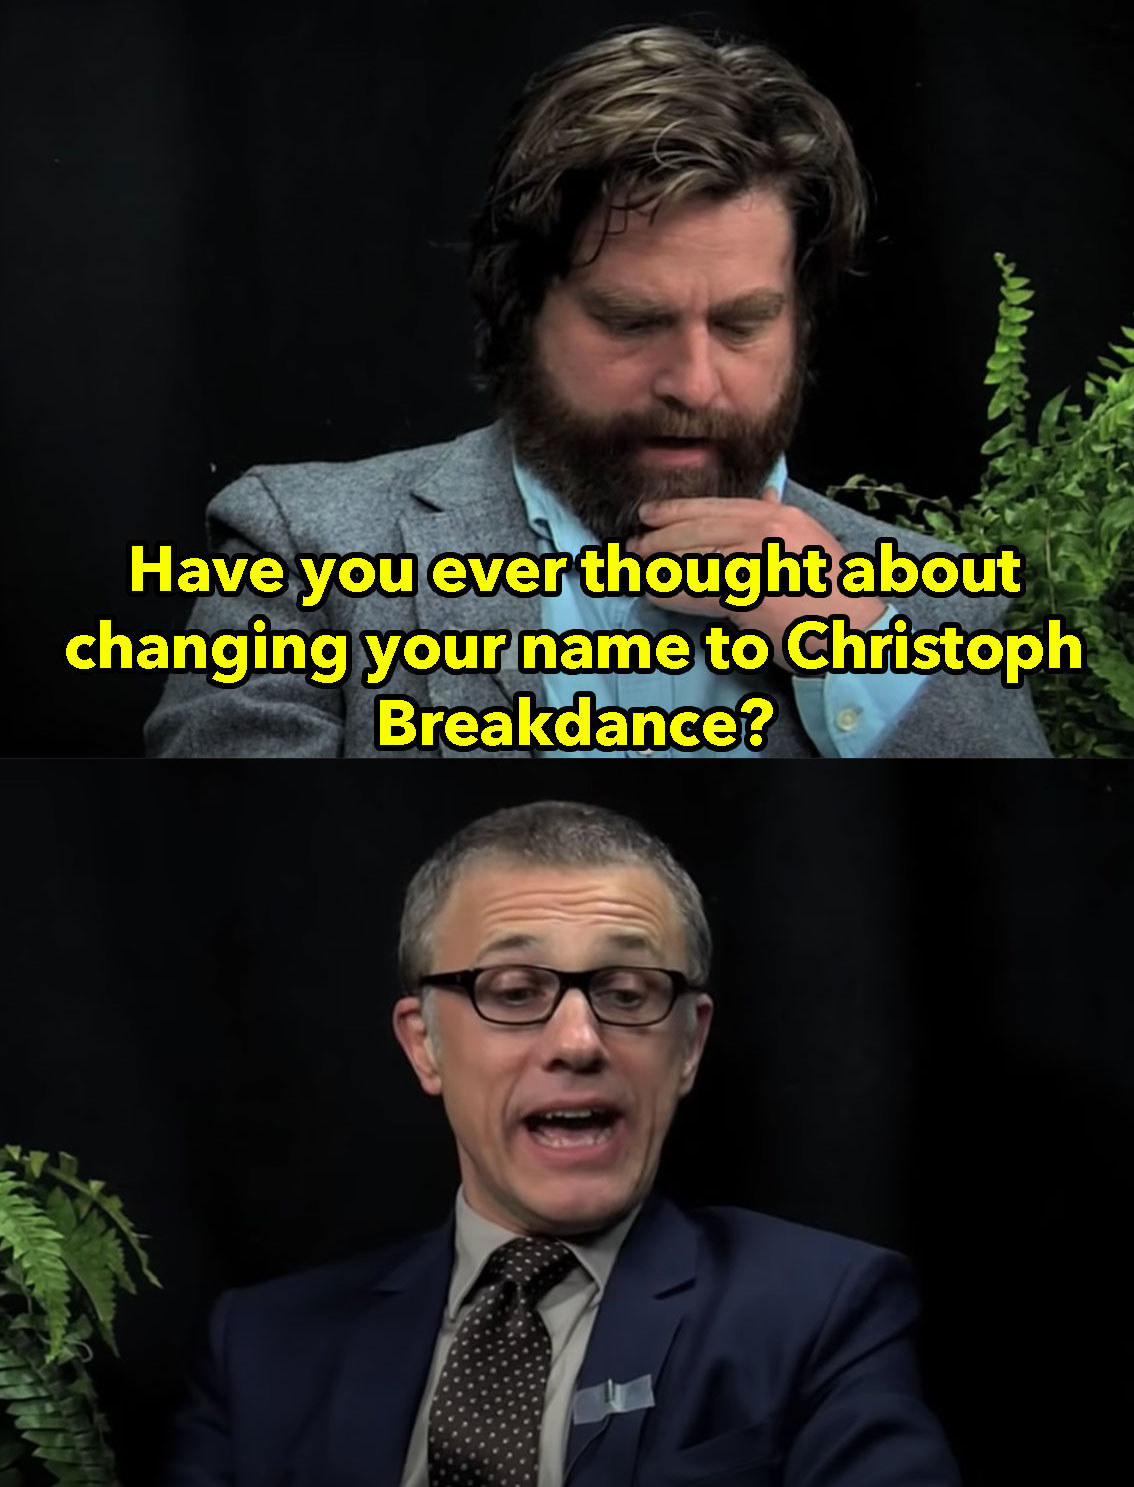 Zach: Have you ever considered changing your name to Christoph Breakdance?